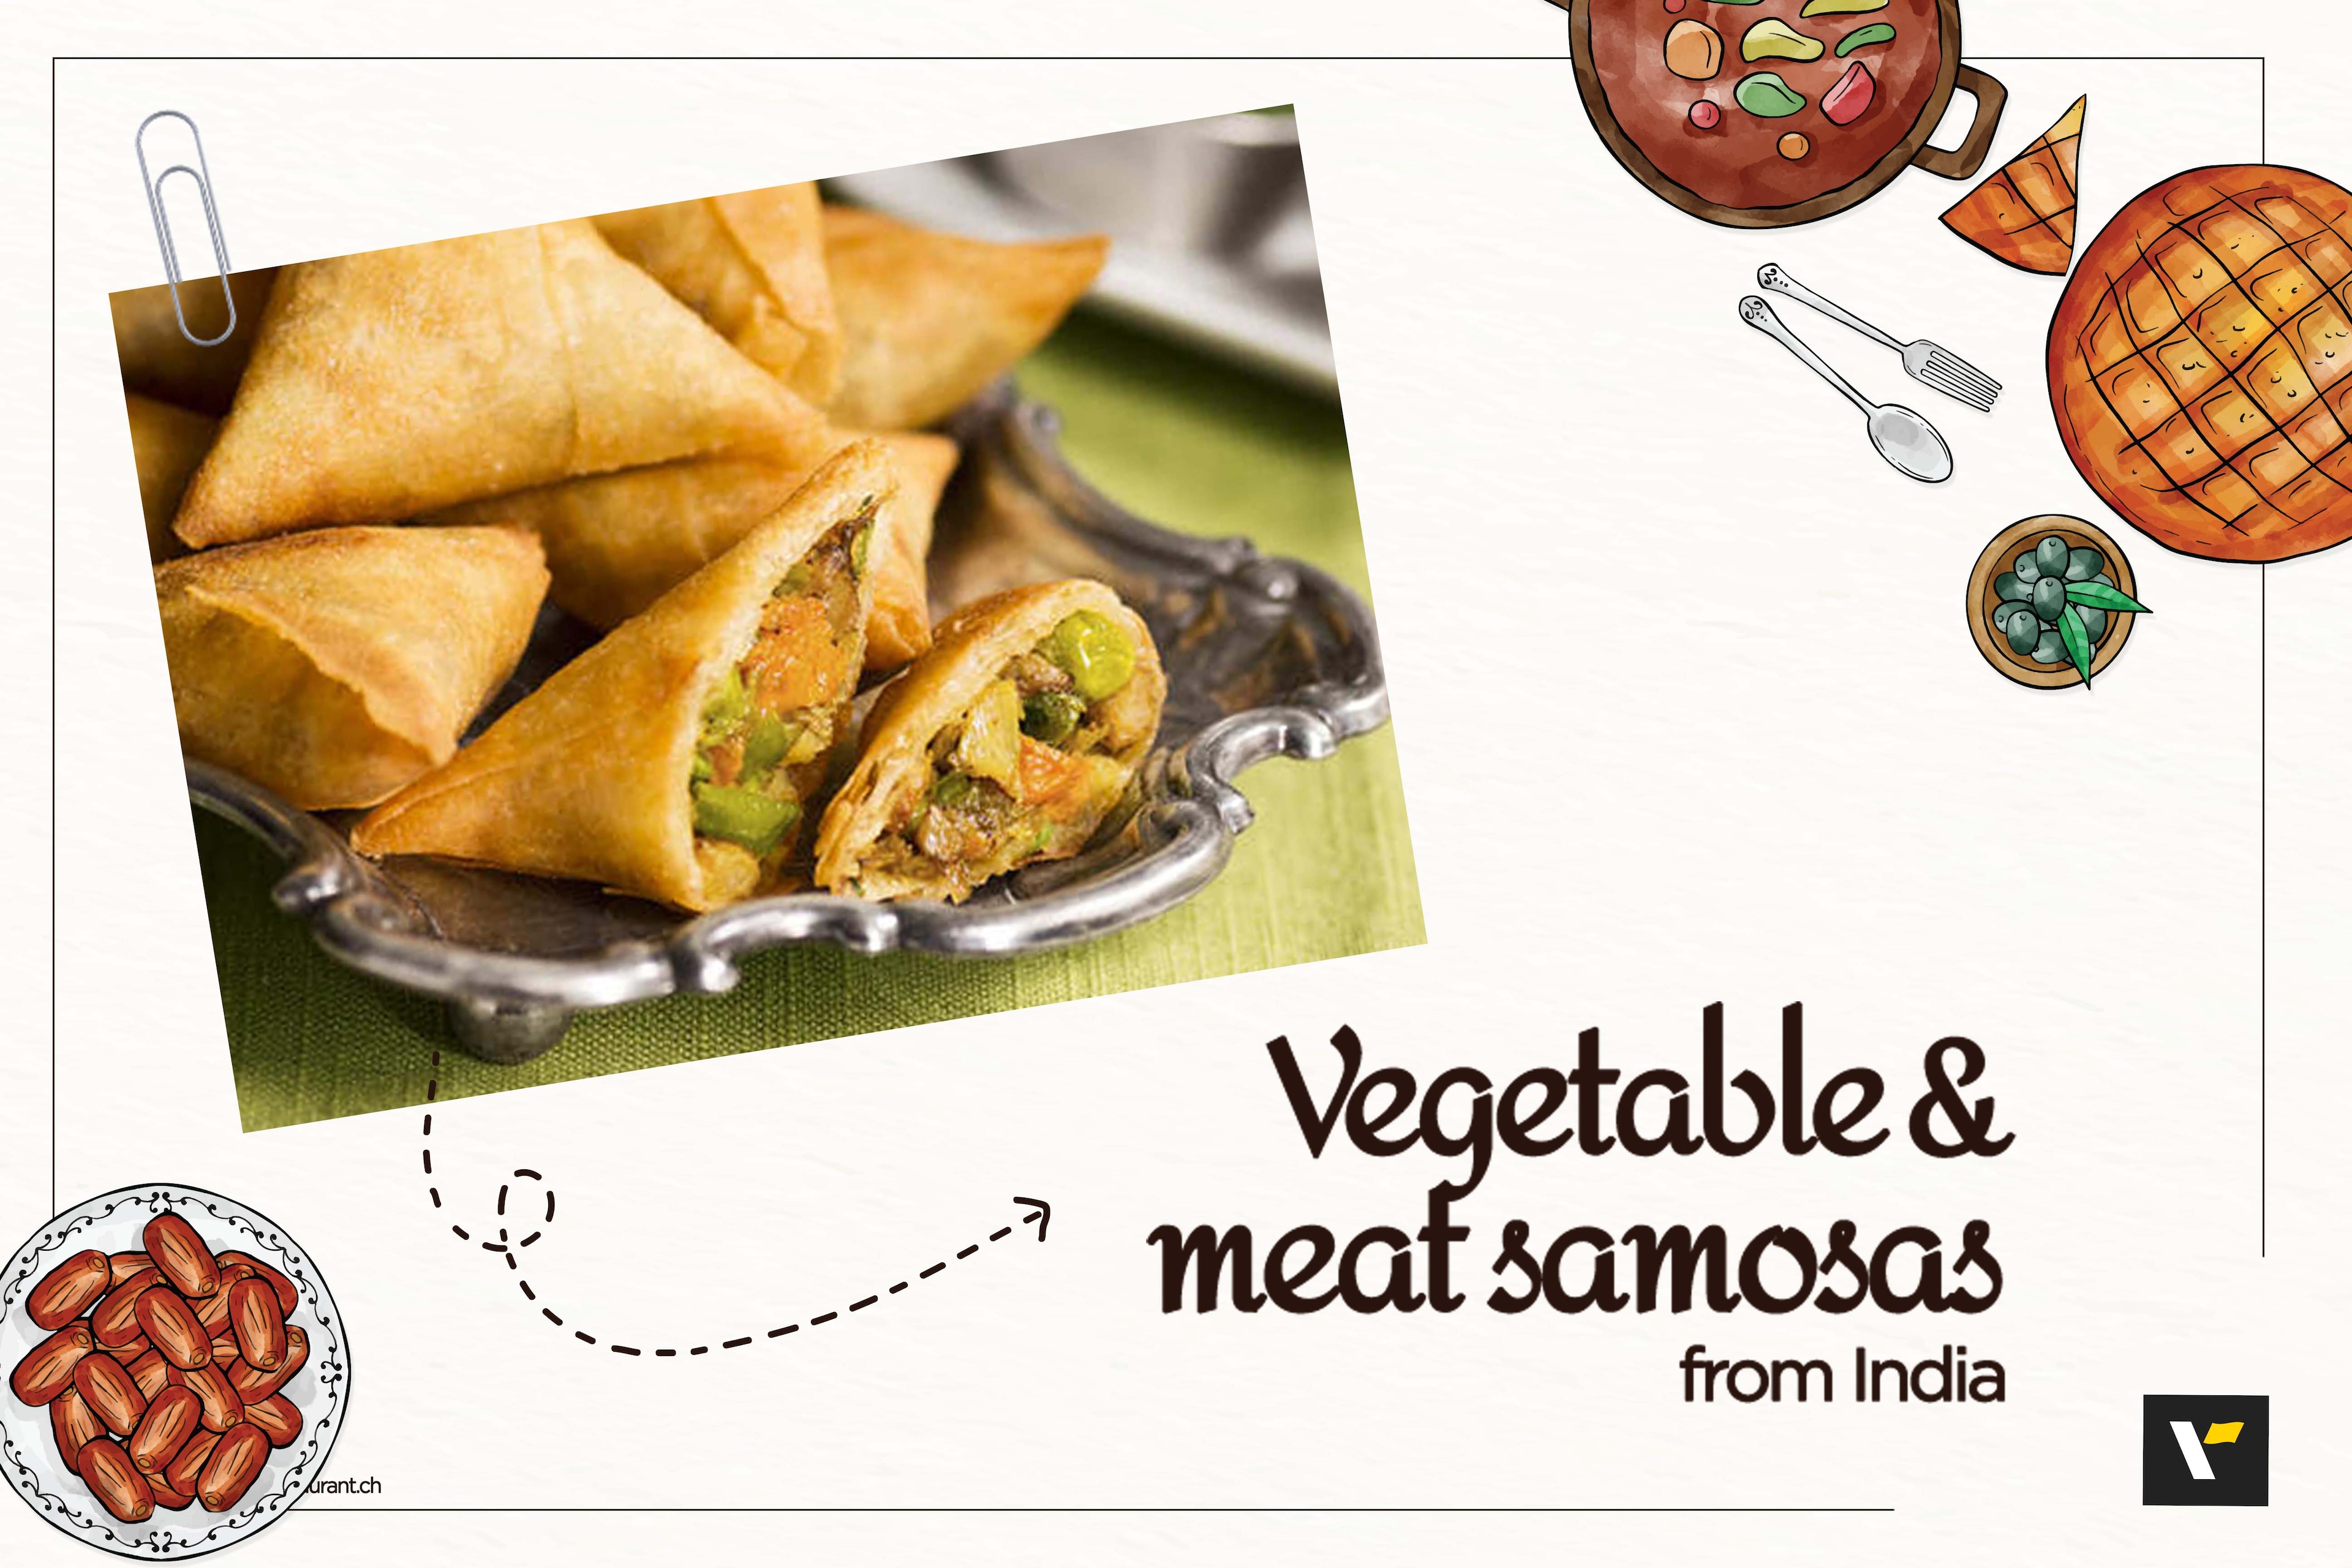 Indian vegetable and meat samosas